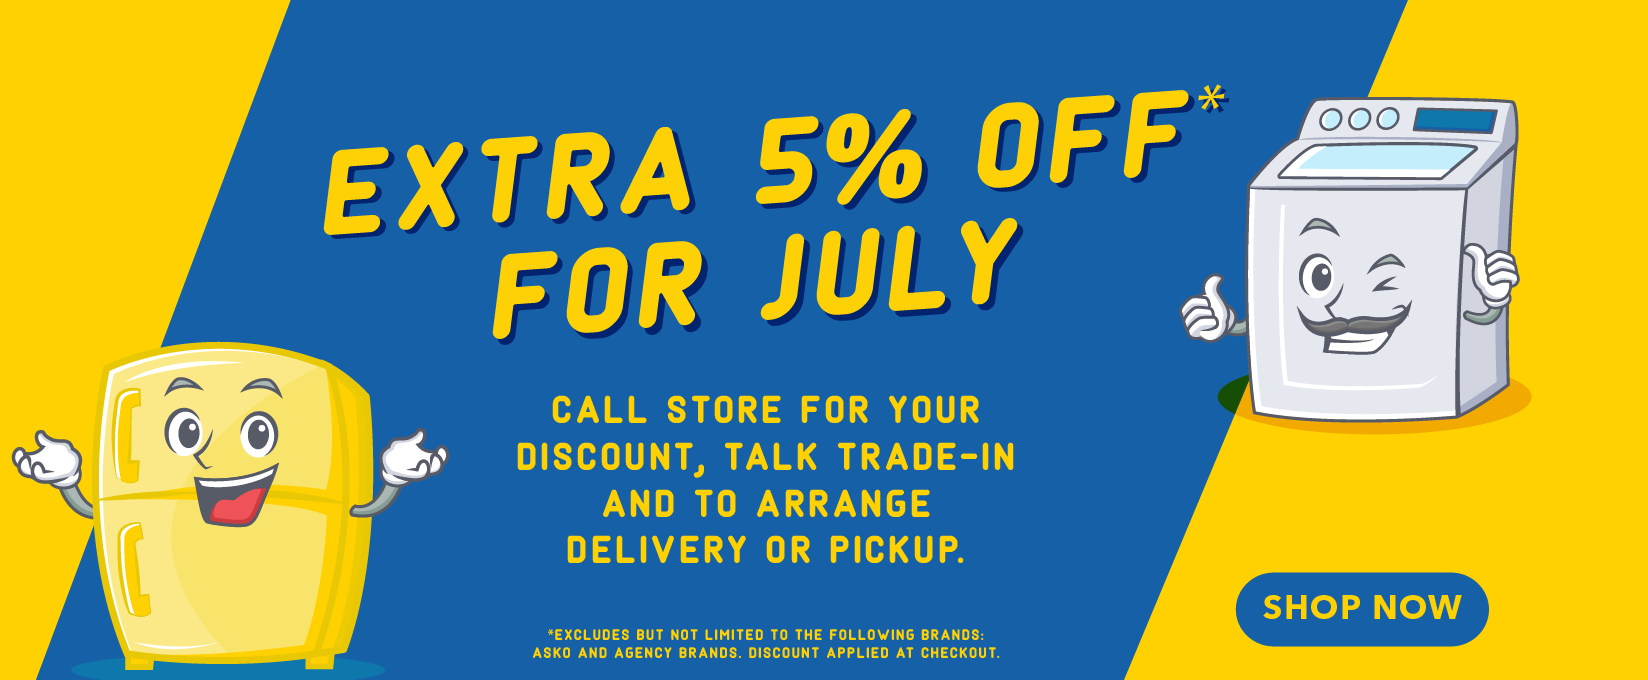 5% off in July